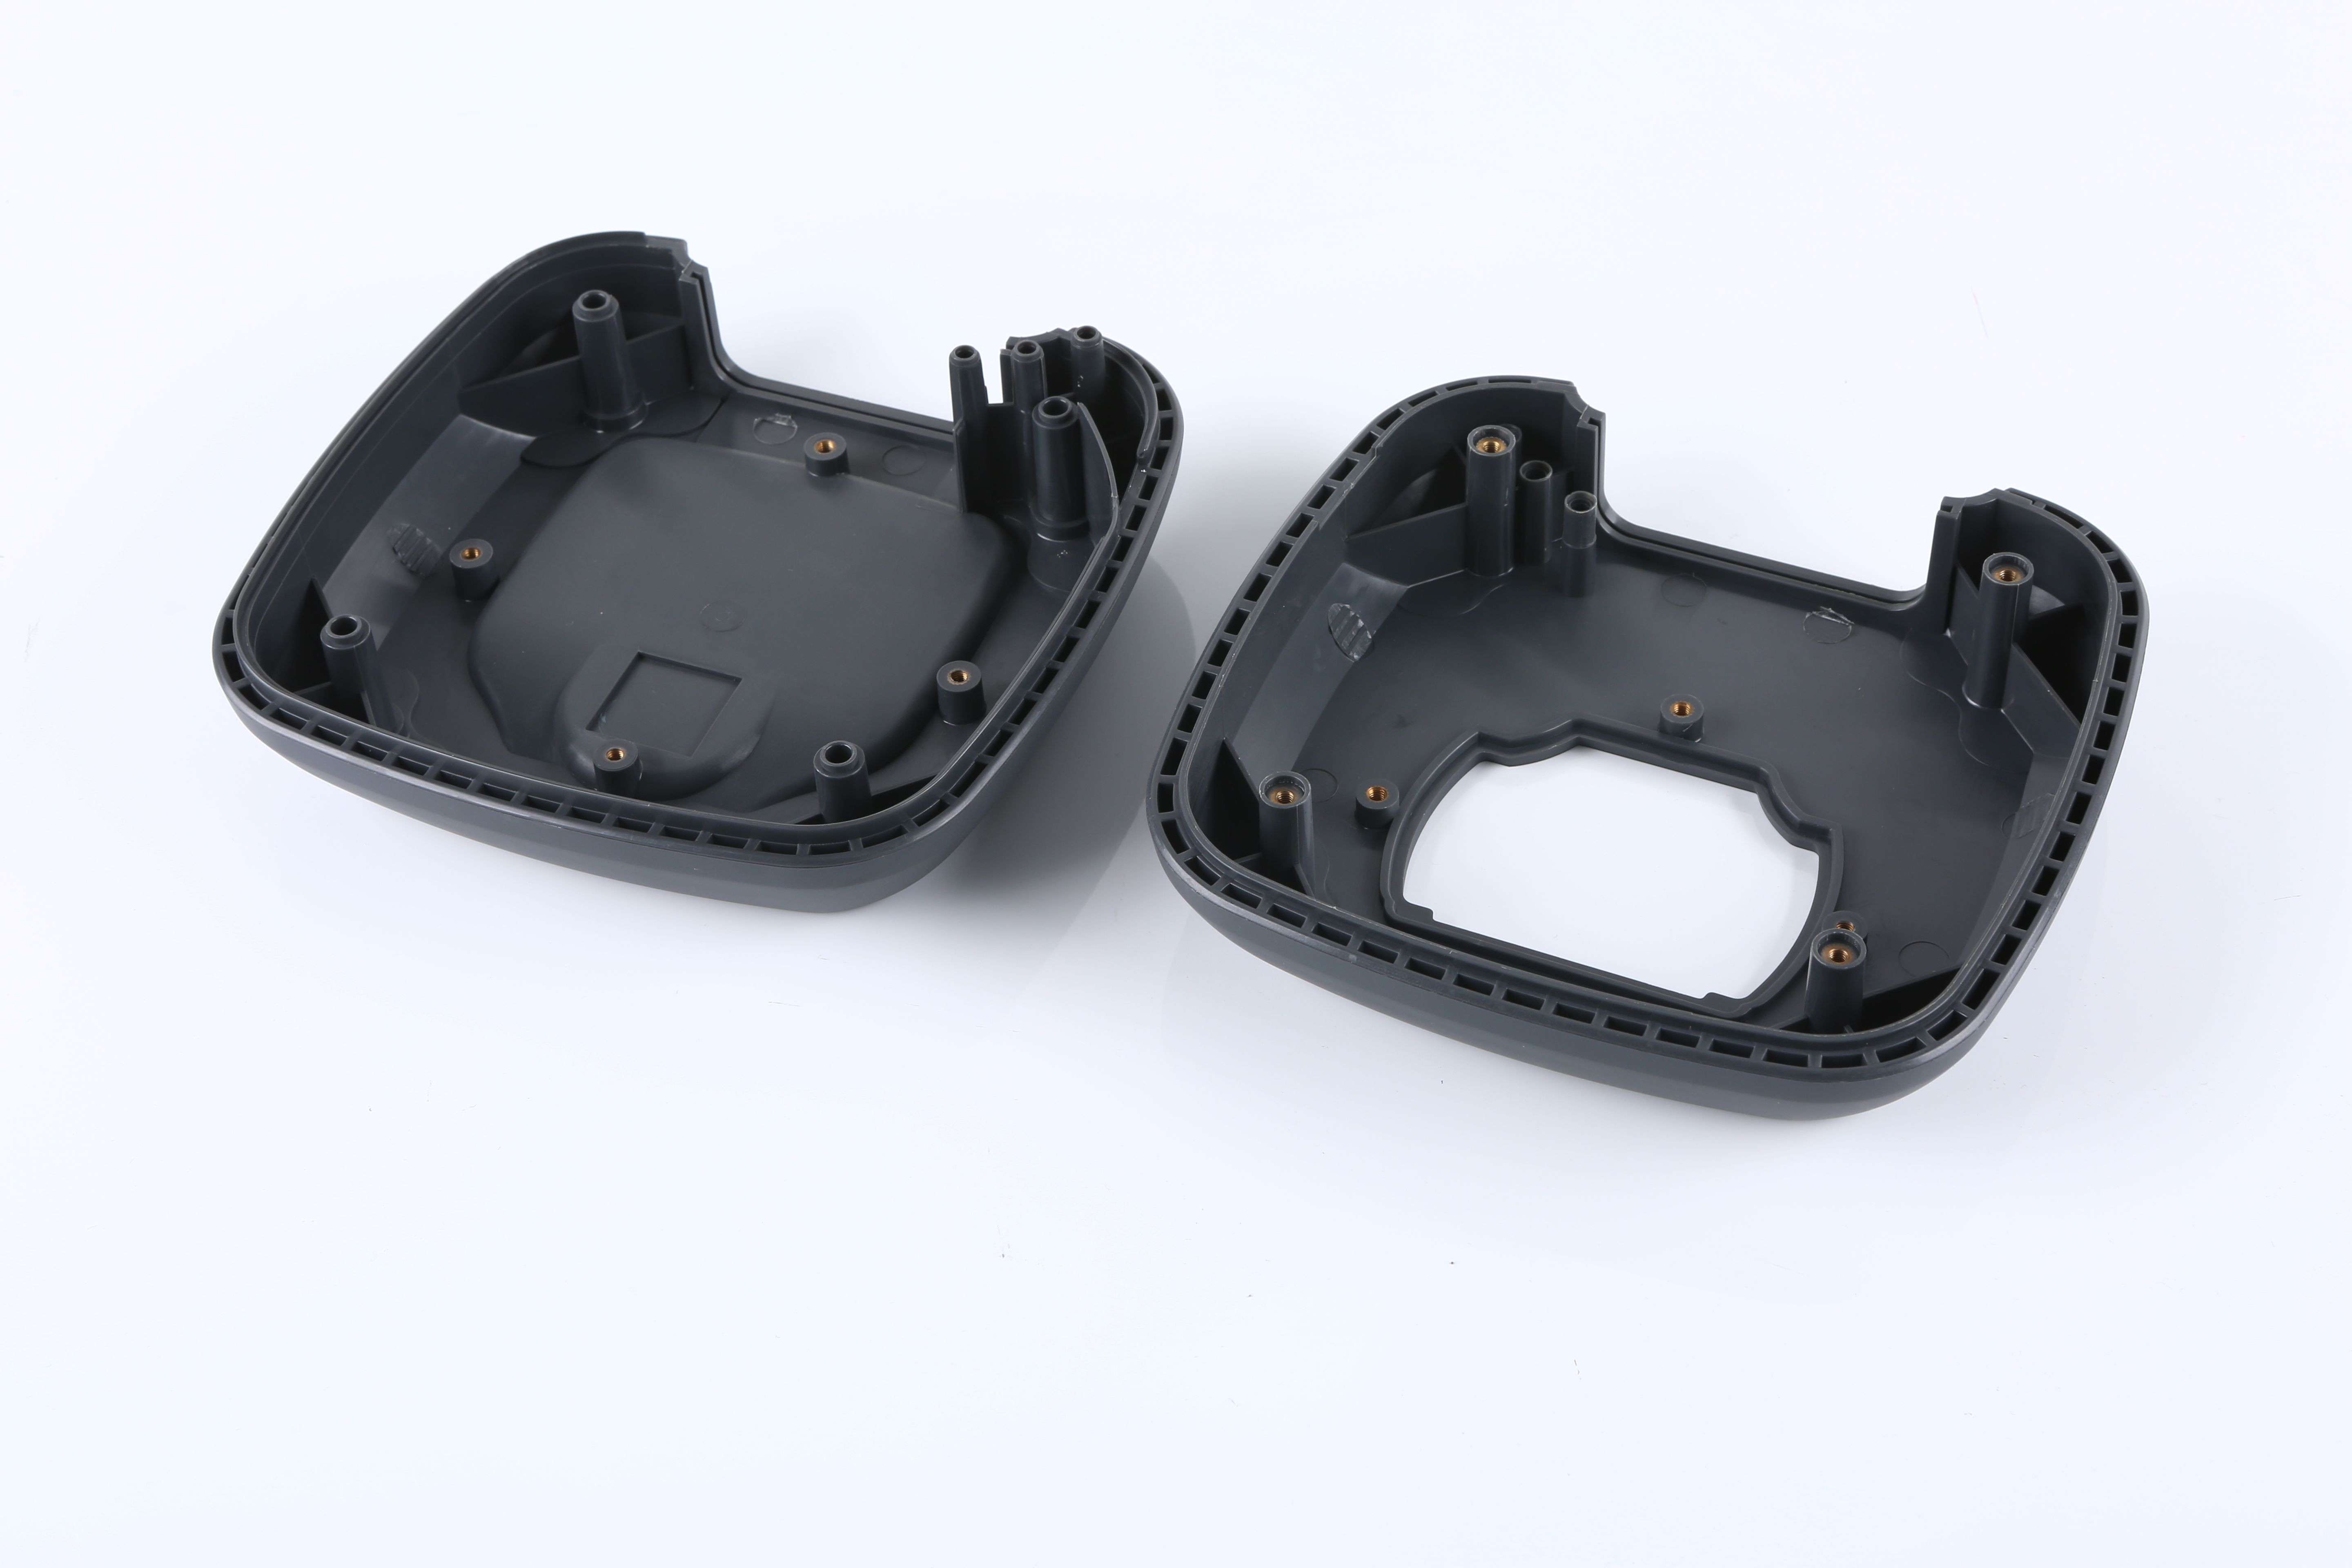 High Quality Charging Seat Injection Mold Home Appliance Plastic Design